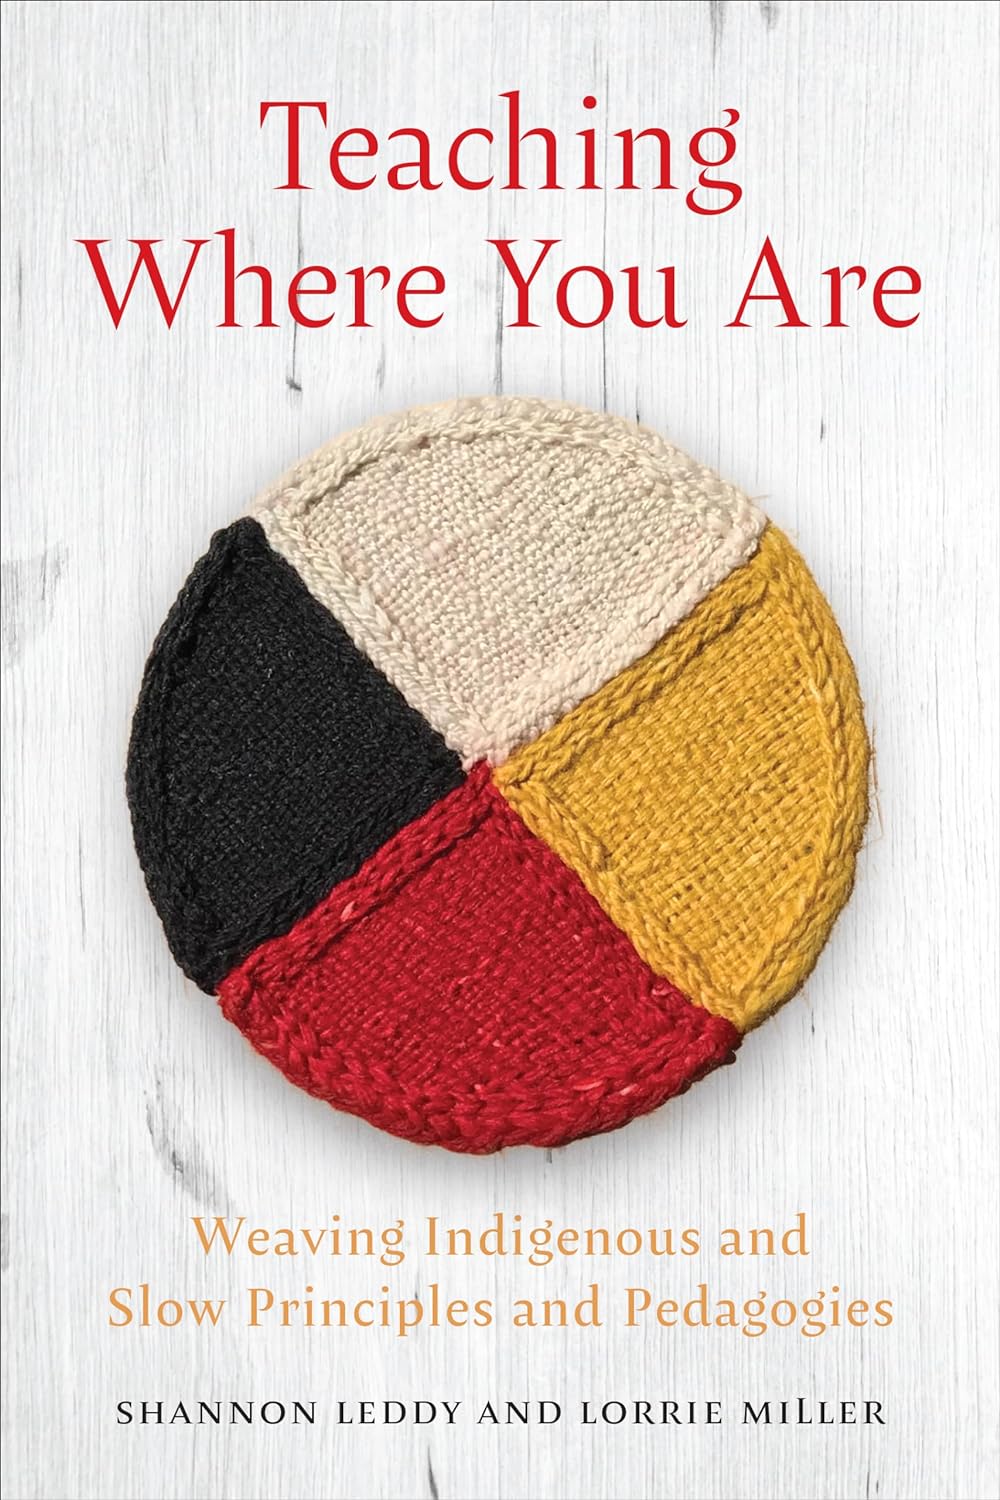 Teaching Where You Are: Weaving Indigenous and Slow Principles and Pedagogies by Shannon Leddy & Lorrie Miller